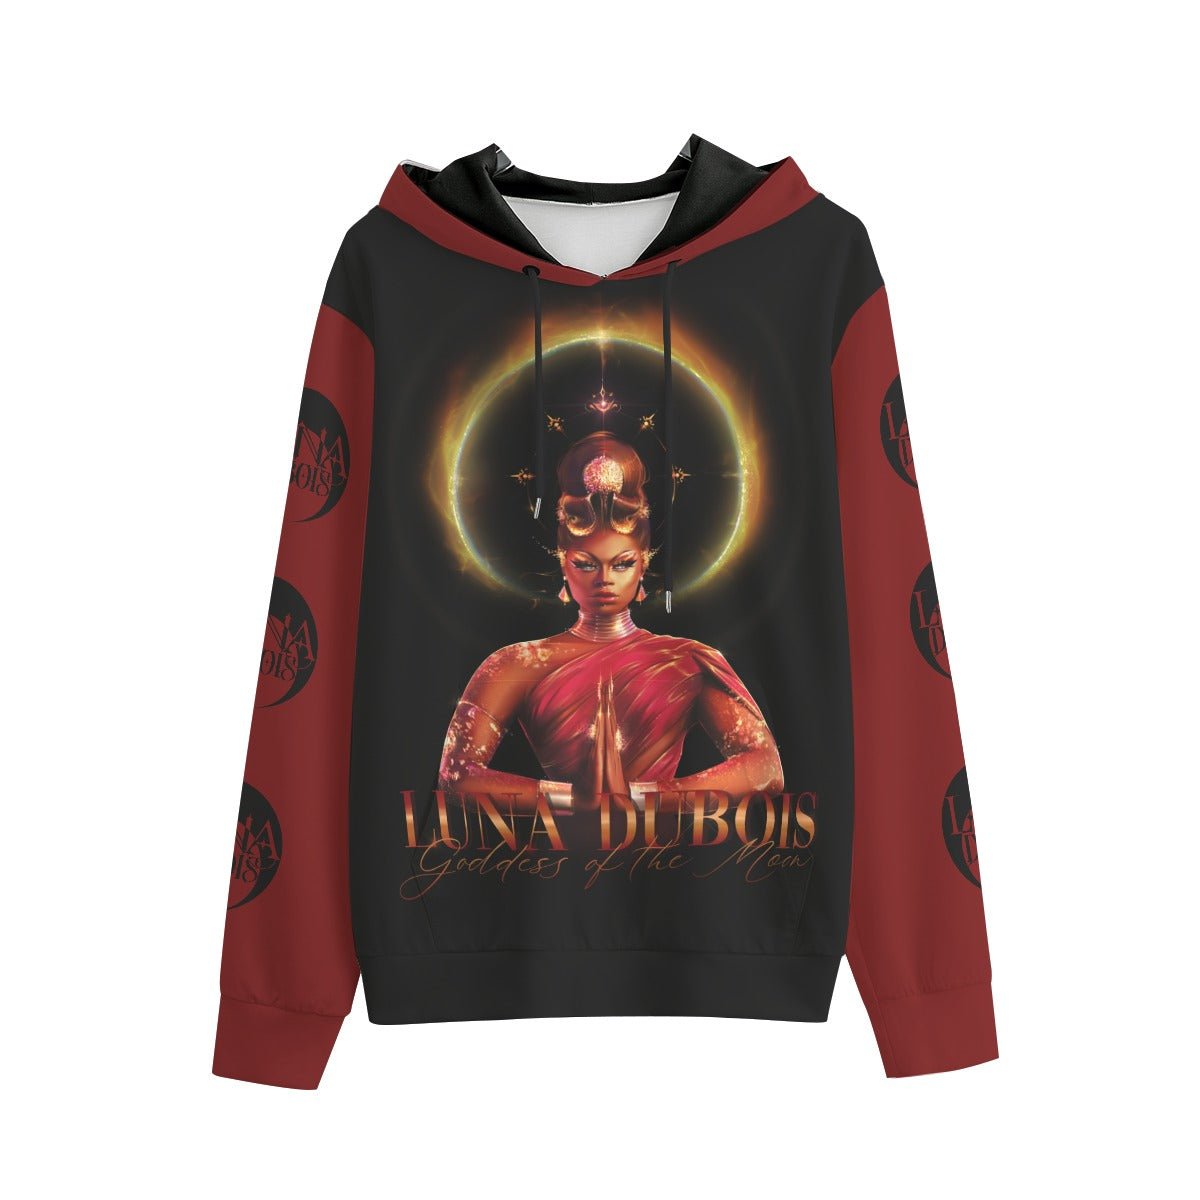 Luna Dubois - Goddess of the Moon All-Over Print Hoodie - dragqueenmerch